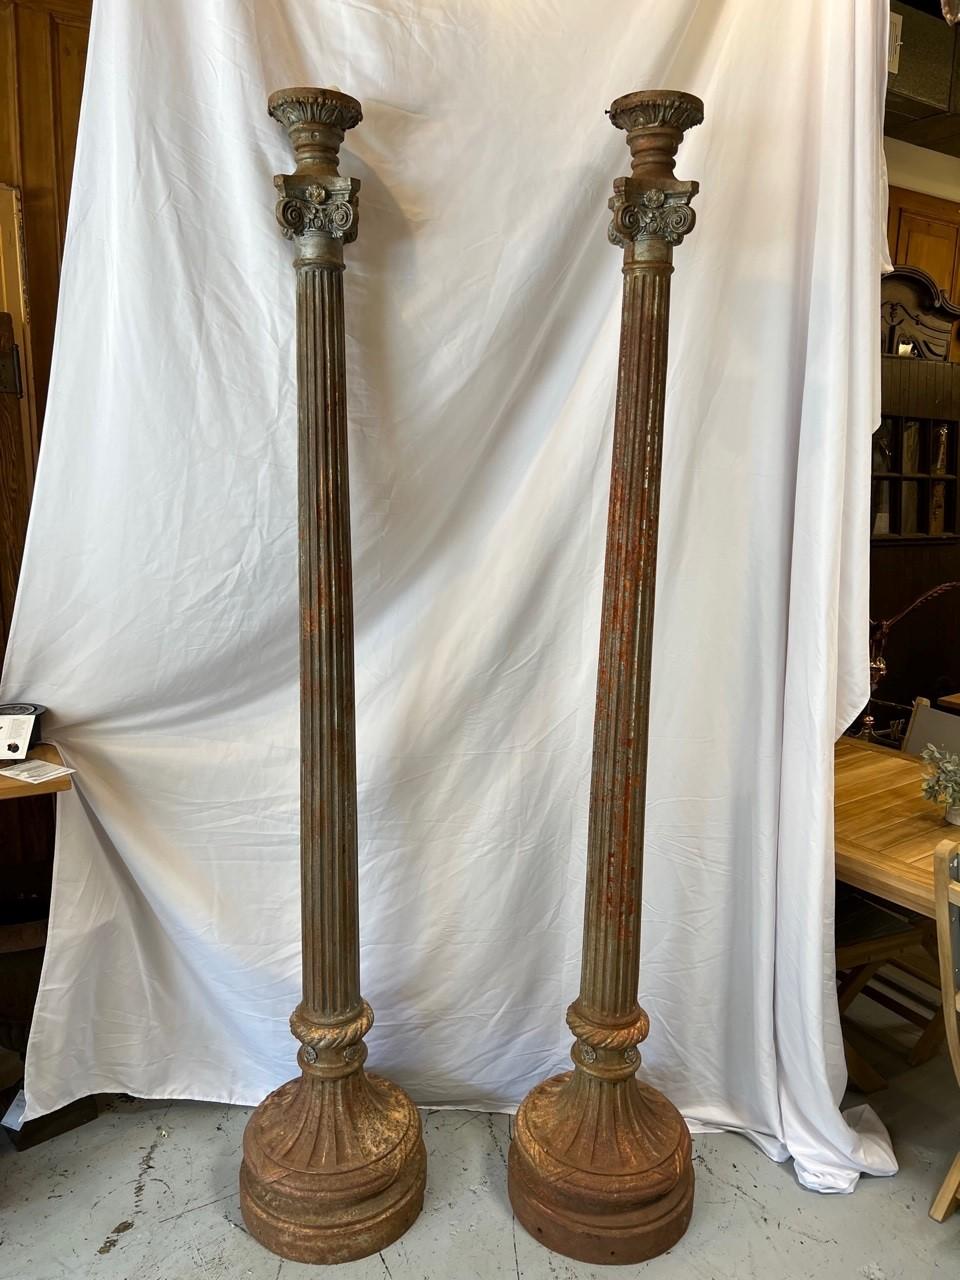 A great pair of antique cast iron lamp posts in very good condition. Pairs of antique cast iron lamp posts are hard to fined. This is a nice pair with a capital on top and fluted columns with a round base. They would need to be rewired and one post